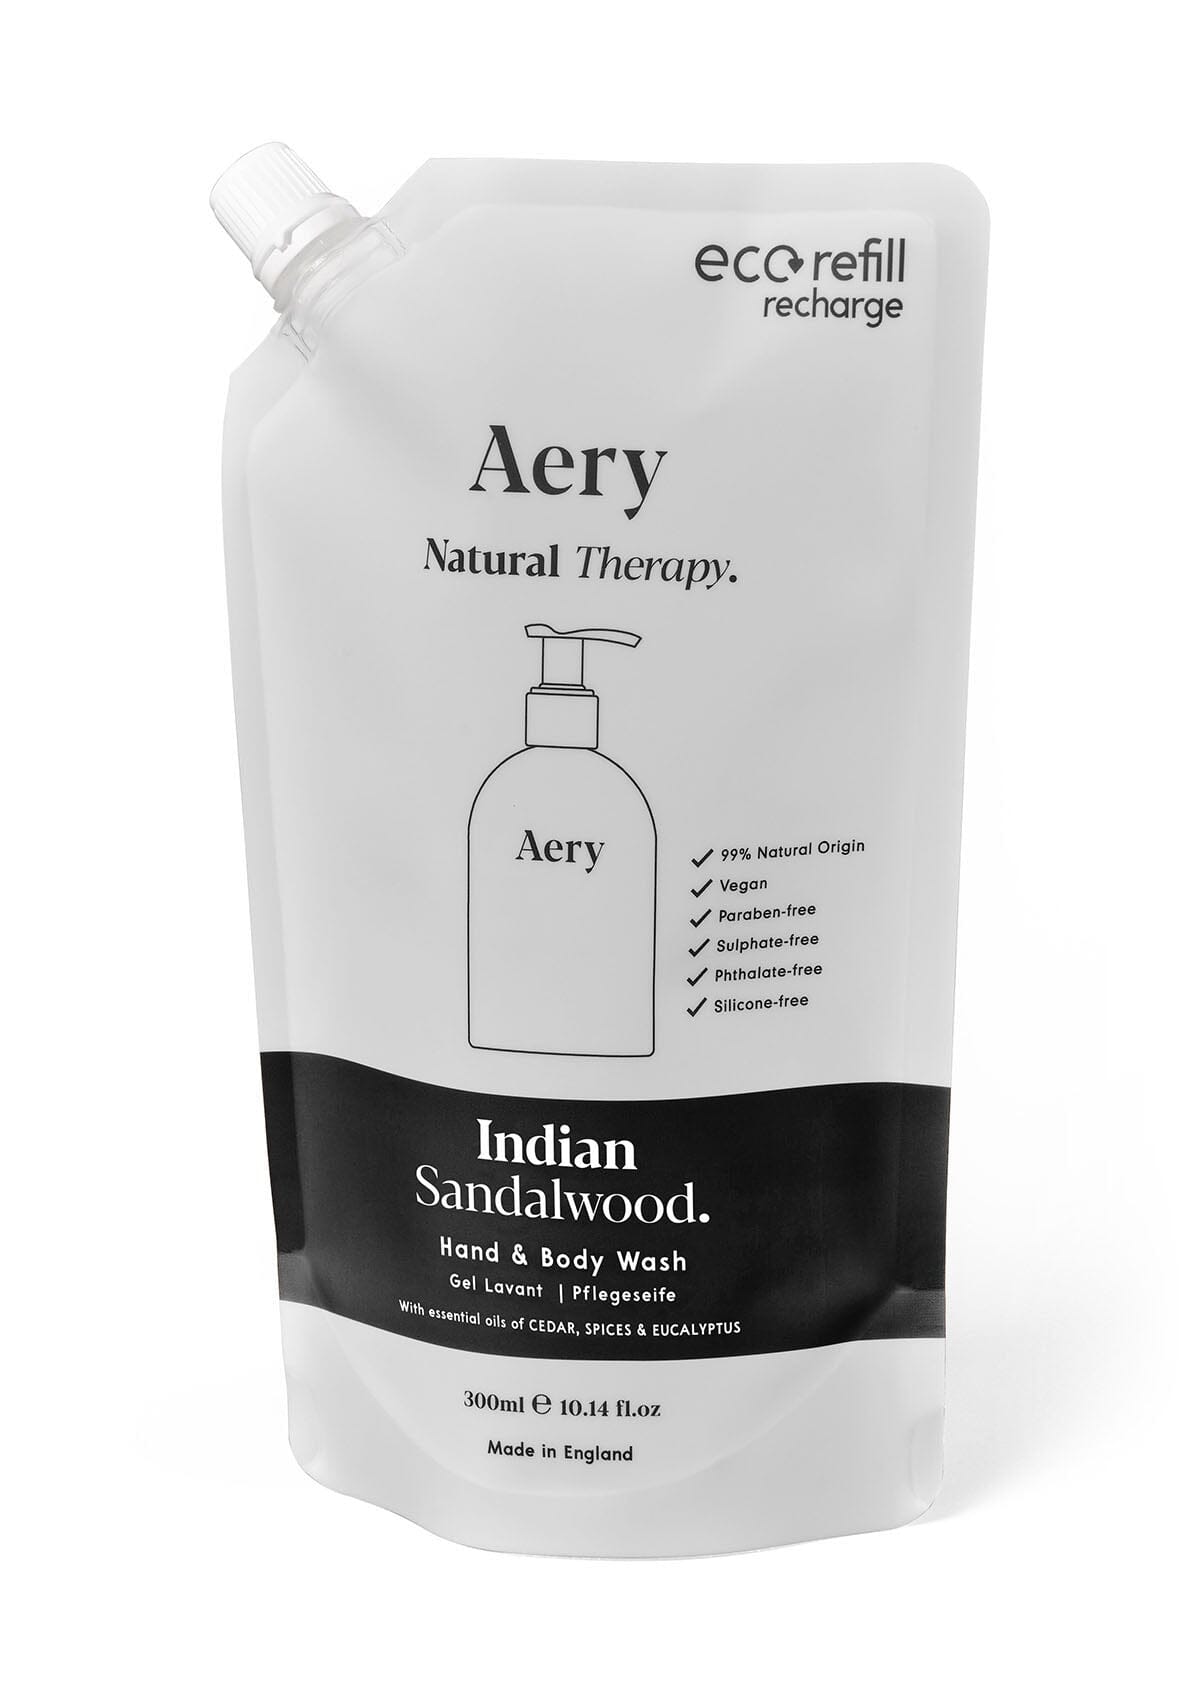 Indian Sandalwood hand and body refill pouch by aery displayed on white background  